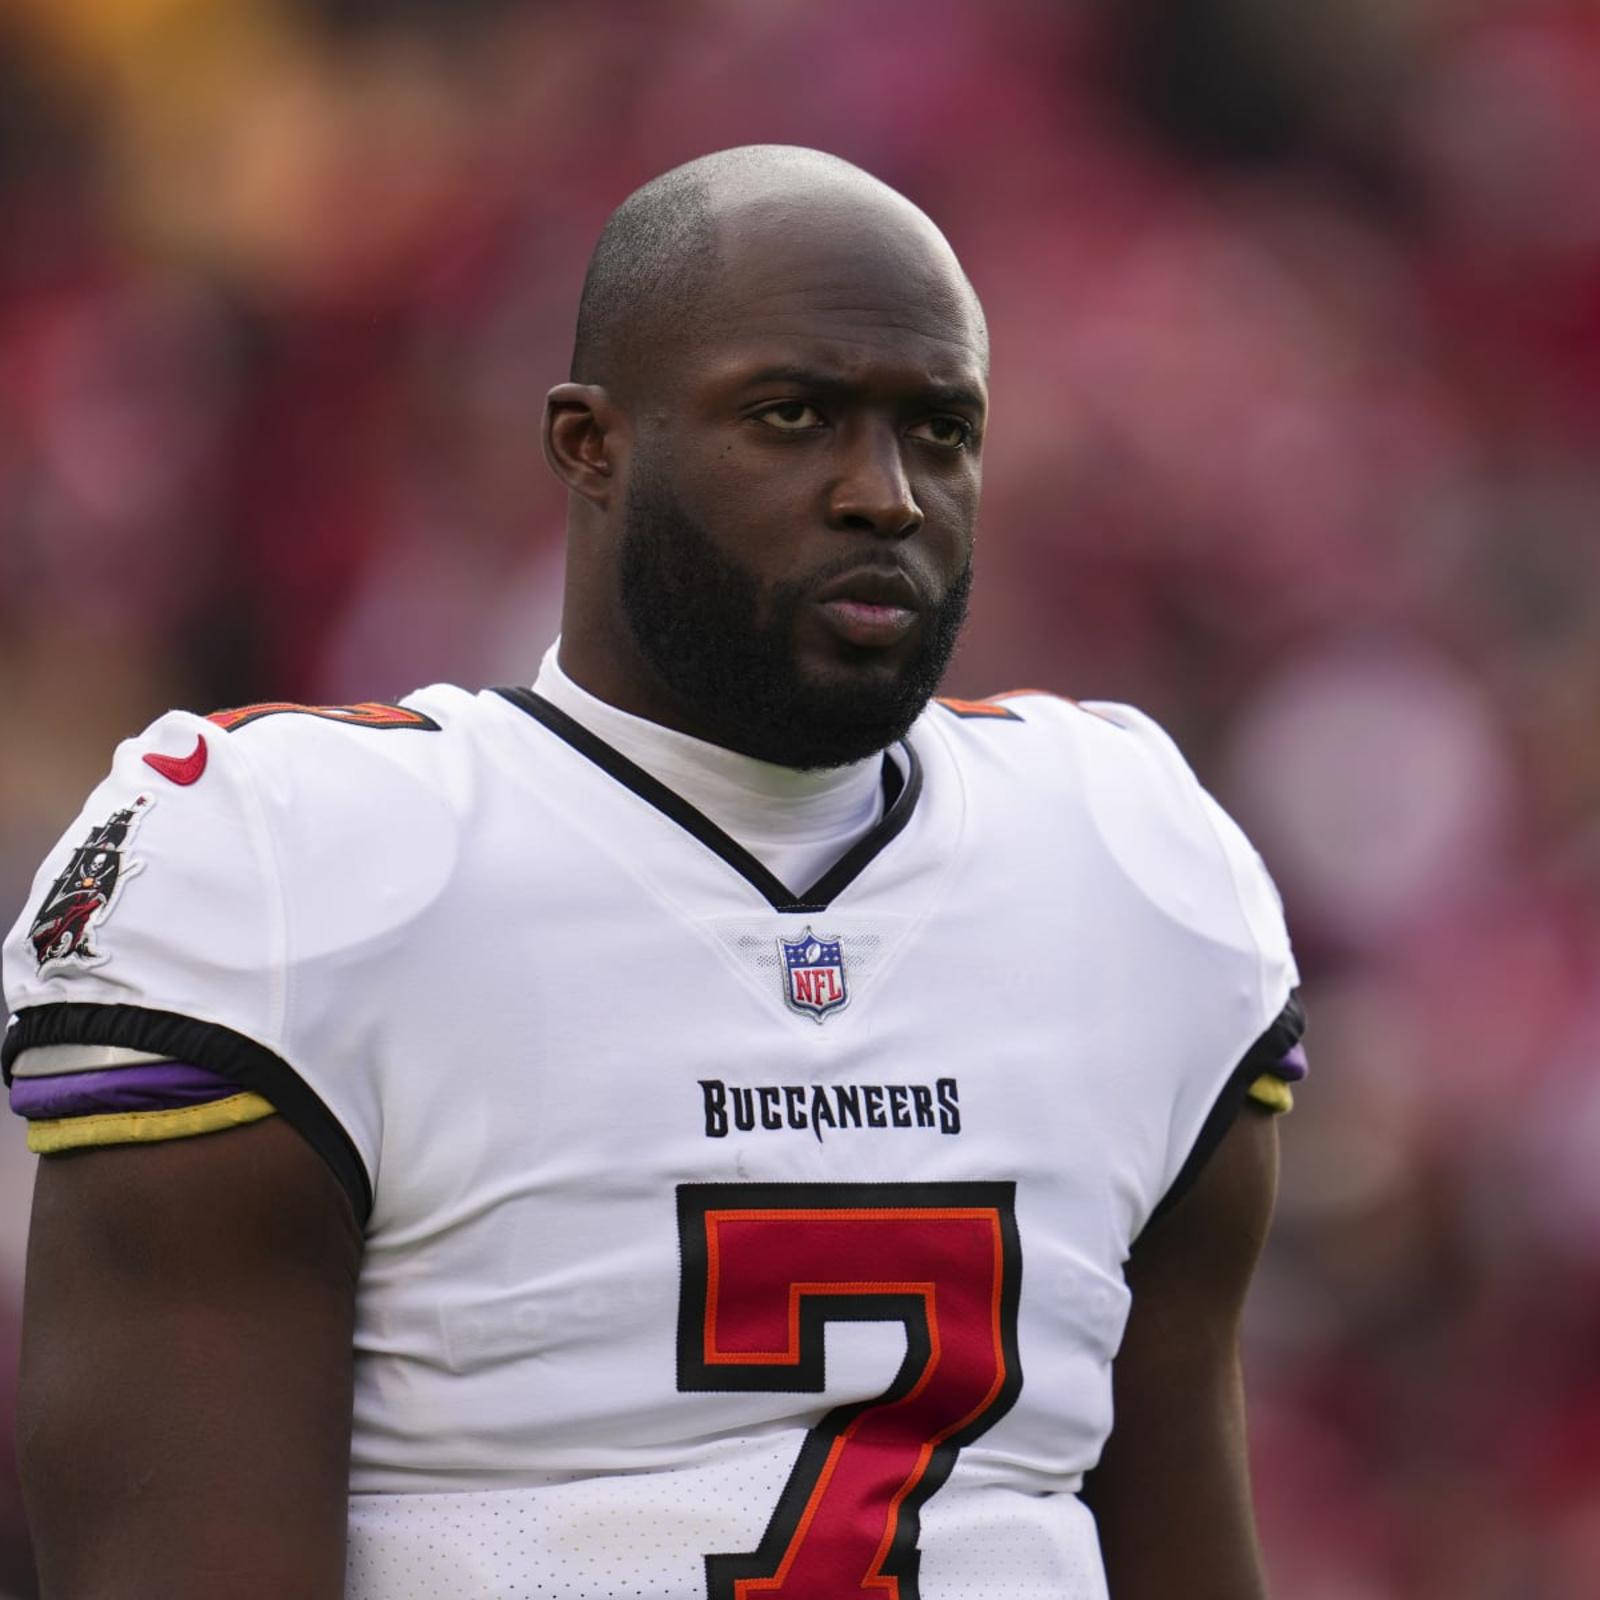 Leonard Fournette signs with the Tampa Bay Buccaneers